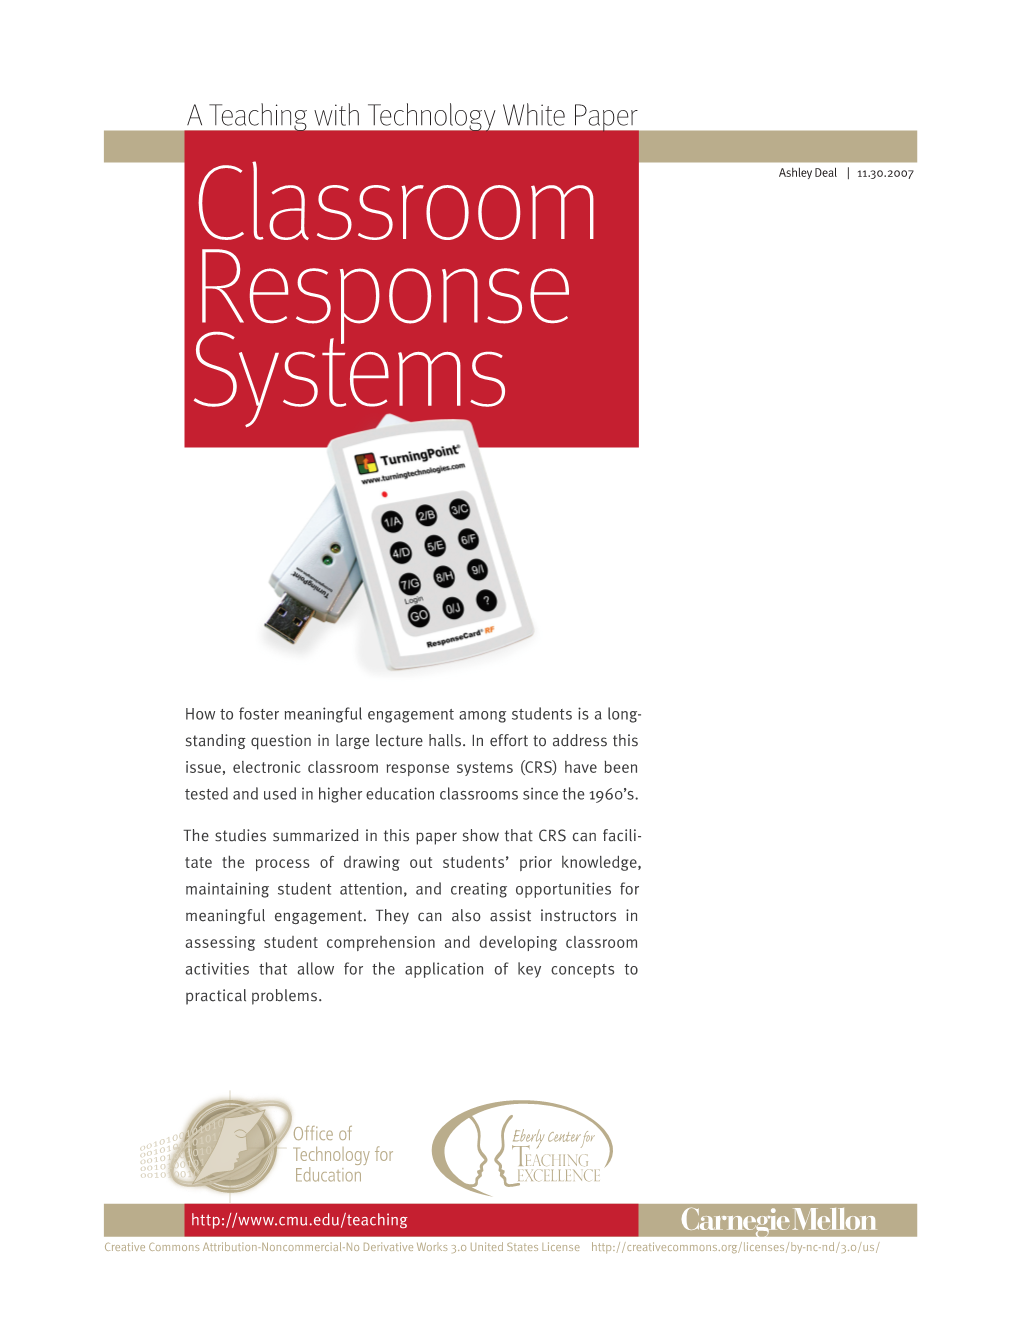 Teaching with Technology Classroom Response Systems